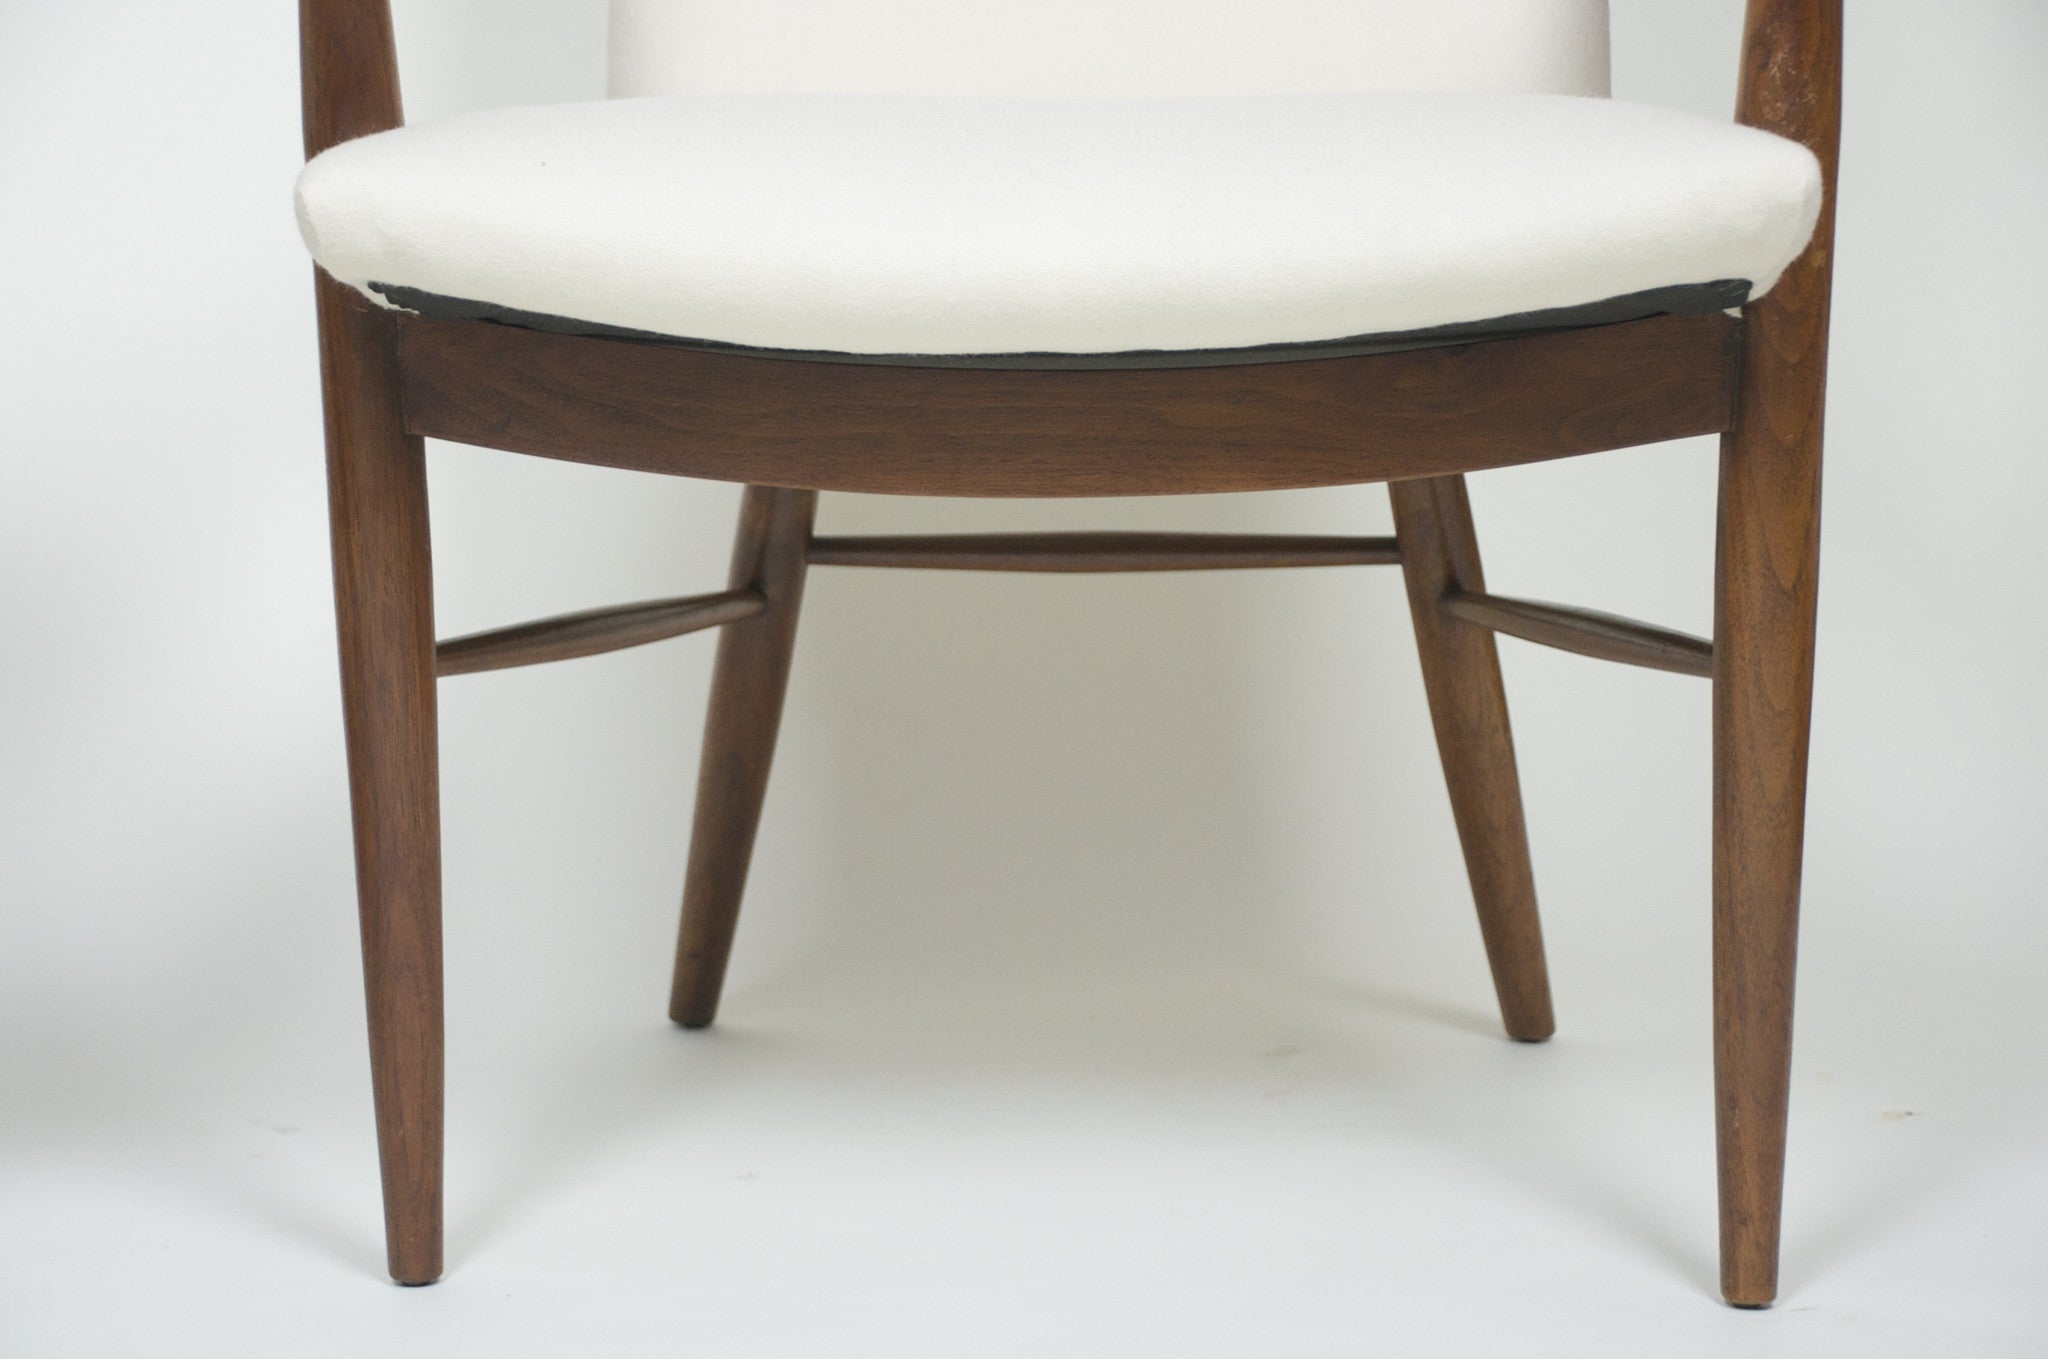 SOLD George Nakashima for Widdicomb Pair Of Origins Armchairs